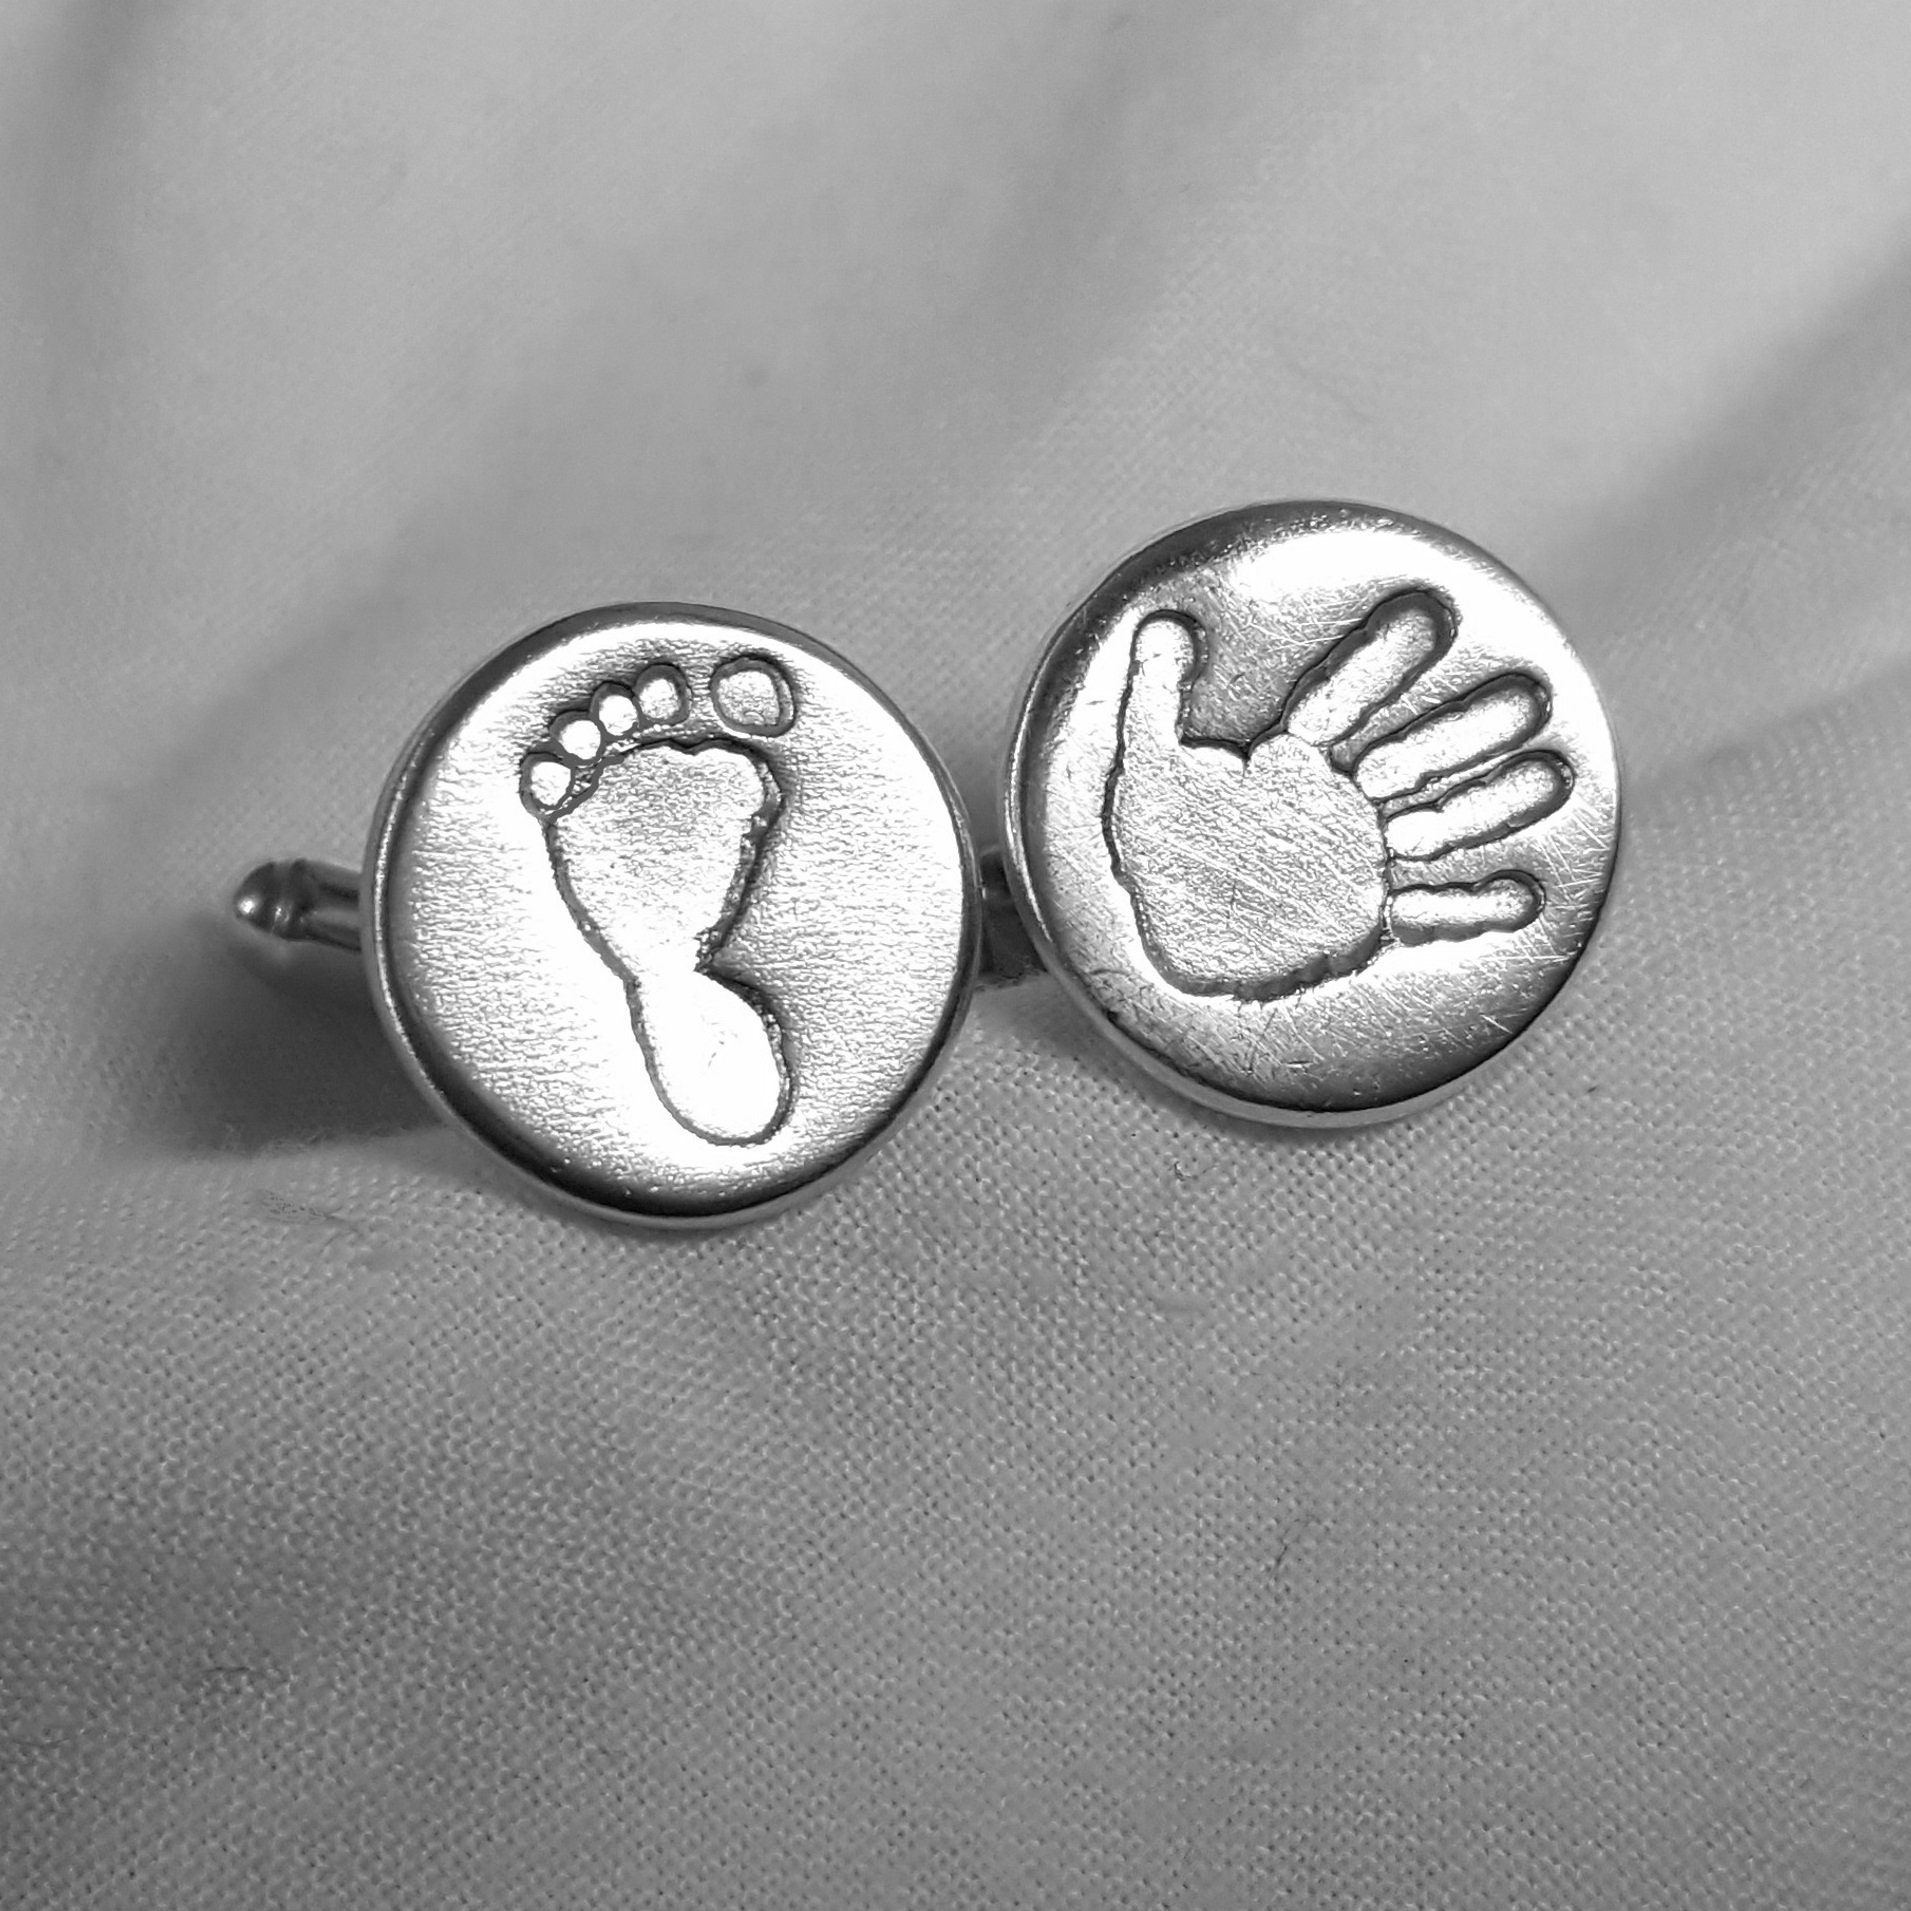 Handprint Footprint Cufflinks - Hand Print Cuff Links Gifts For New Father Present Grandfather Father’s Day